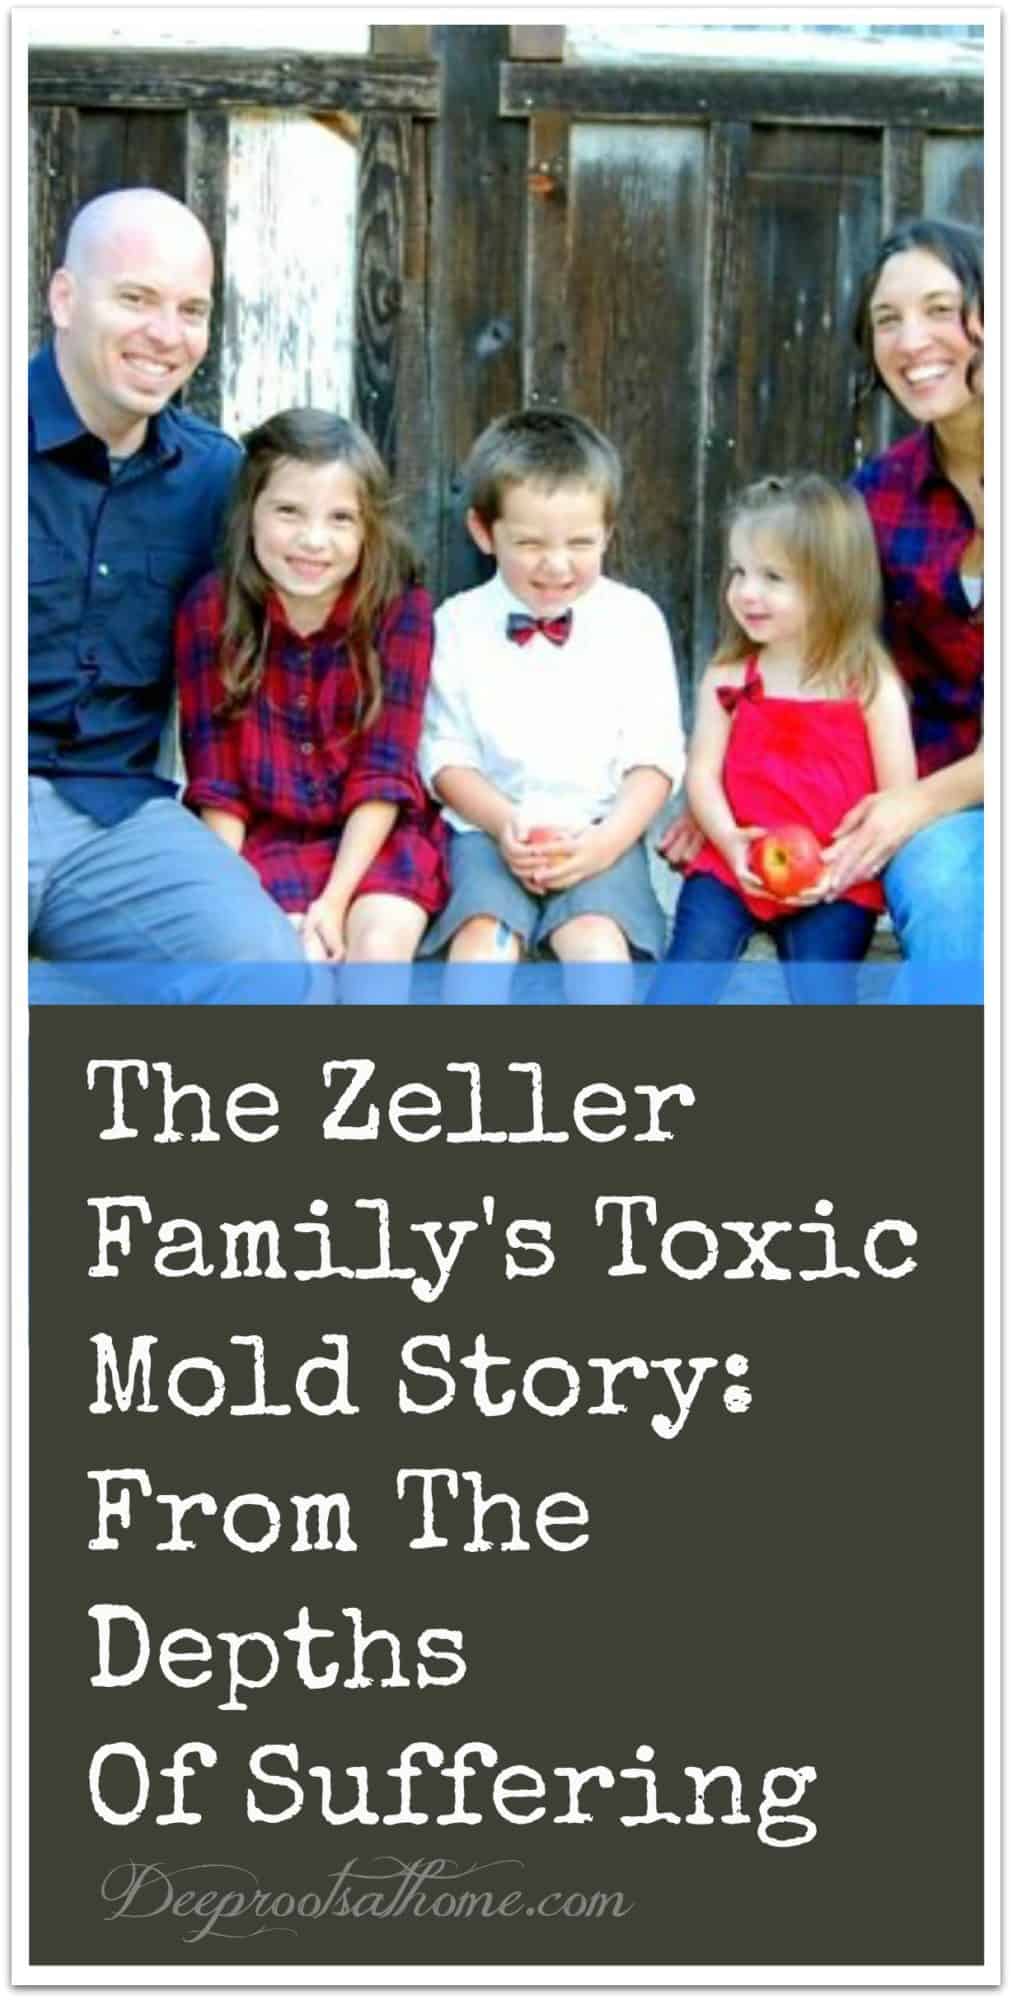 The Zeller Family's Toxic Mold Story: From The Depths Of Suffering